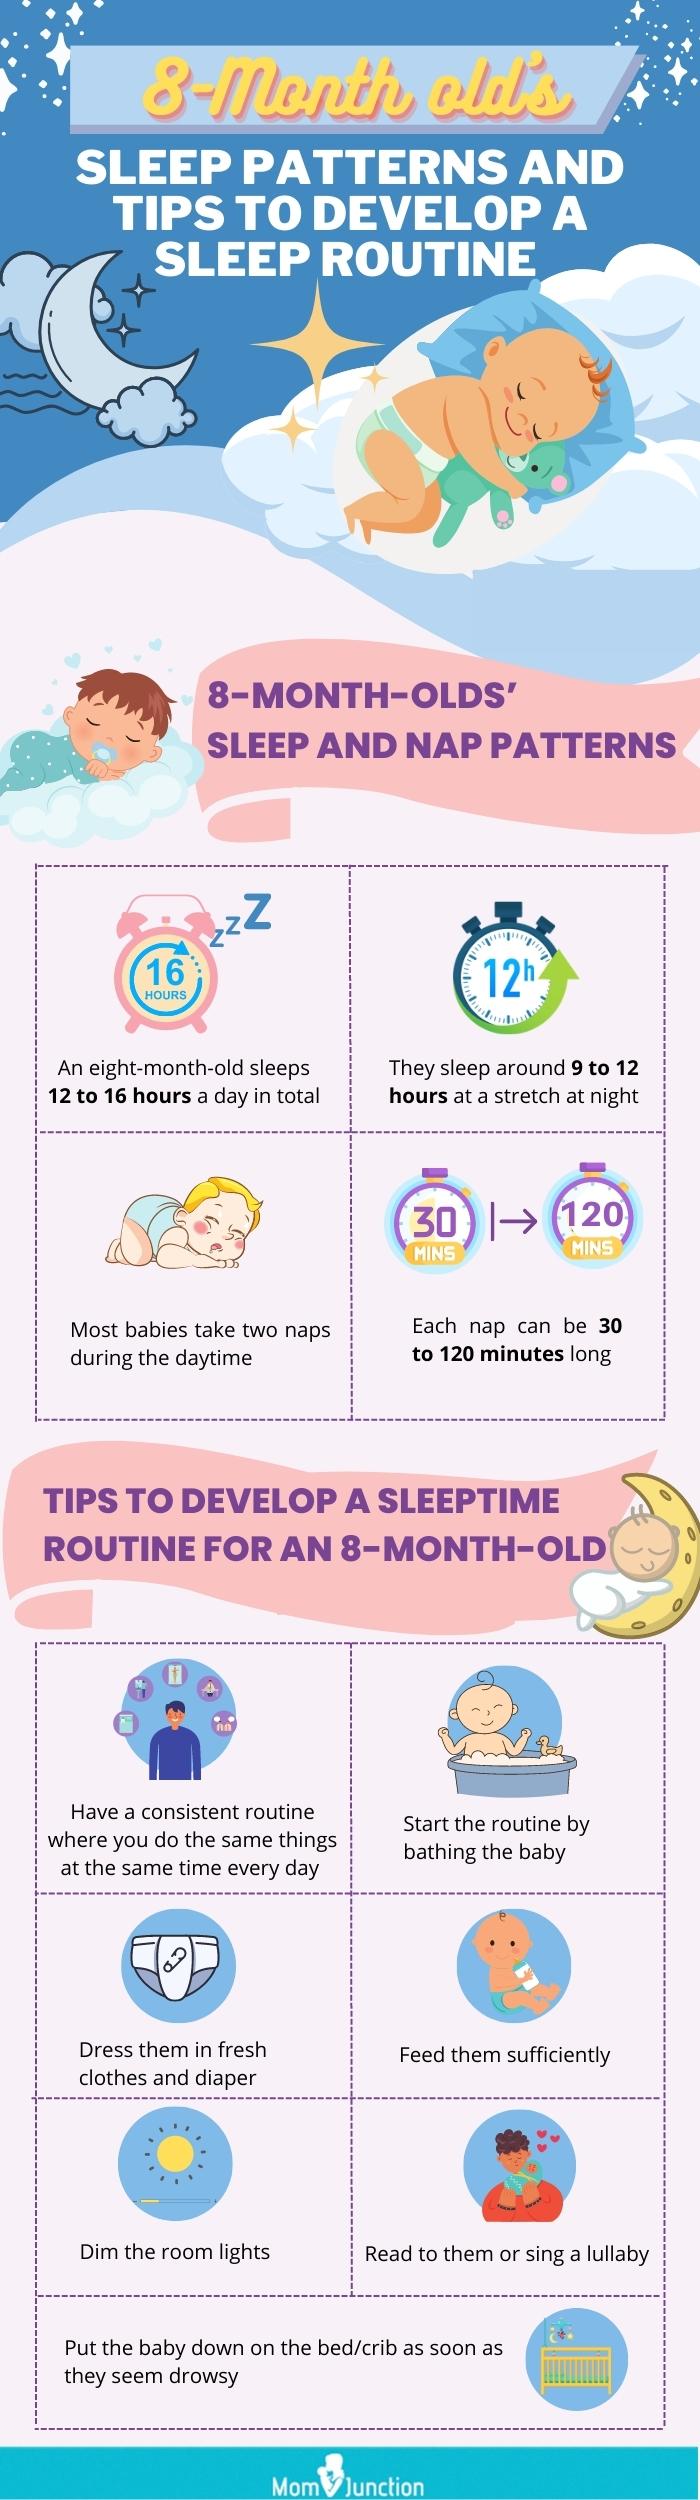 8 month olds sleep patterns and sleep routine (infographic)